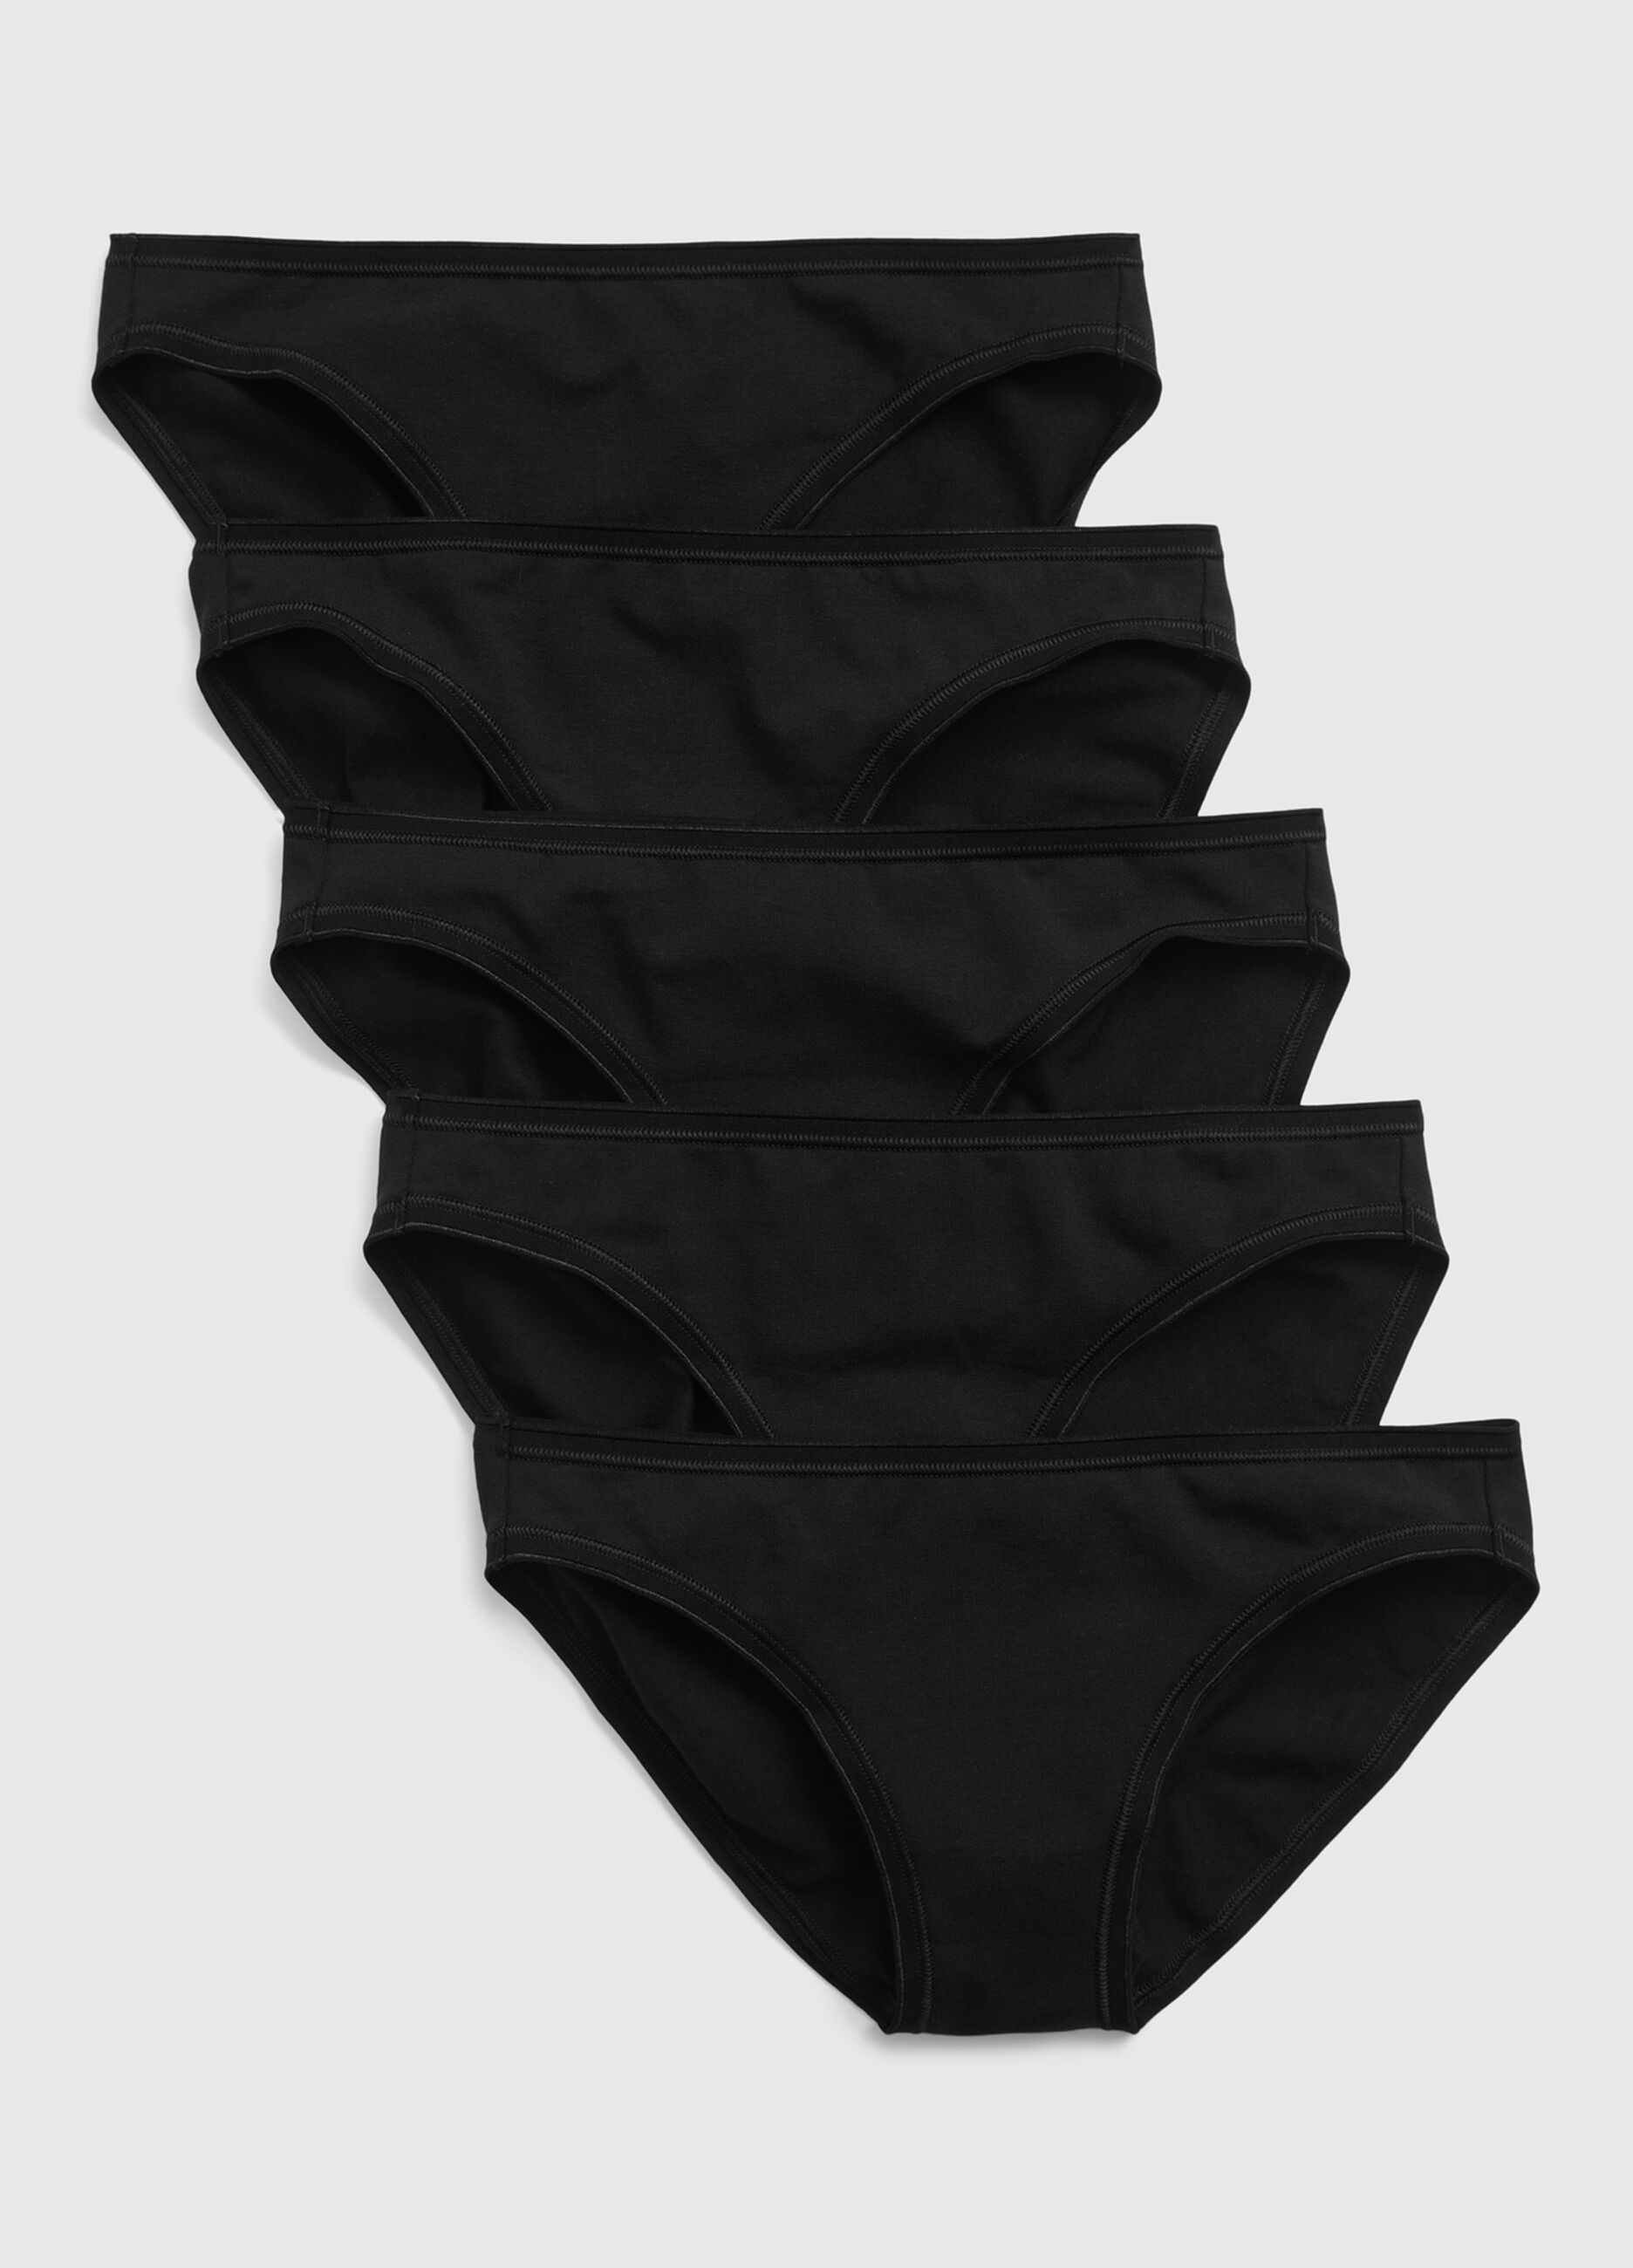 Five-pair pack of stretch briefs